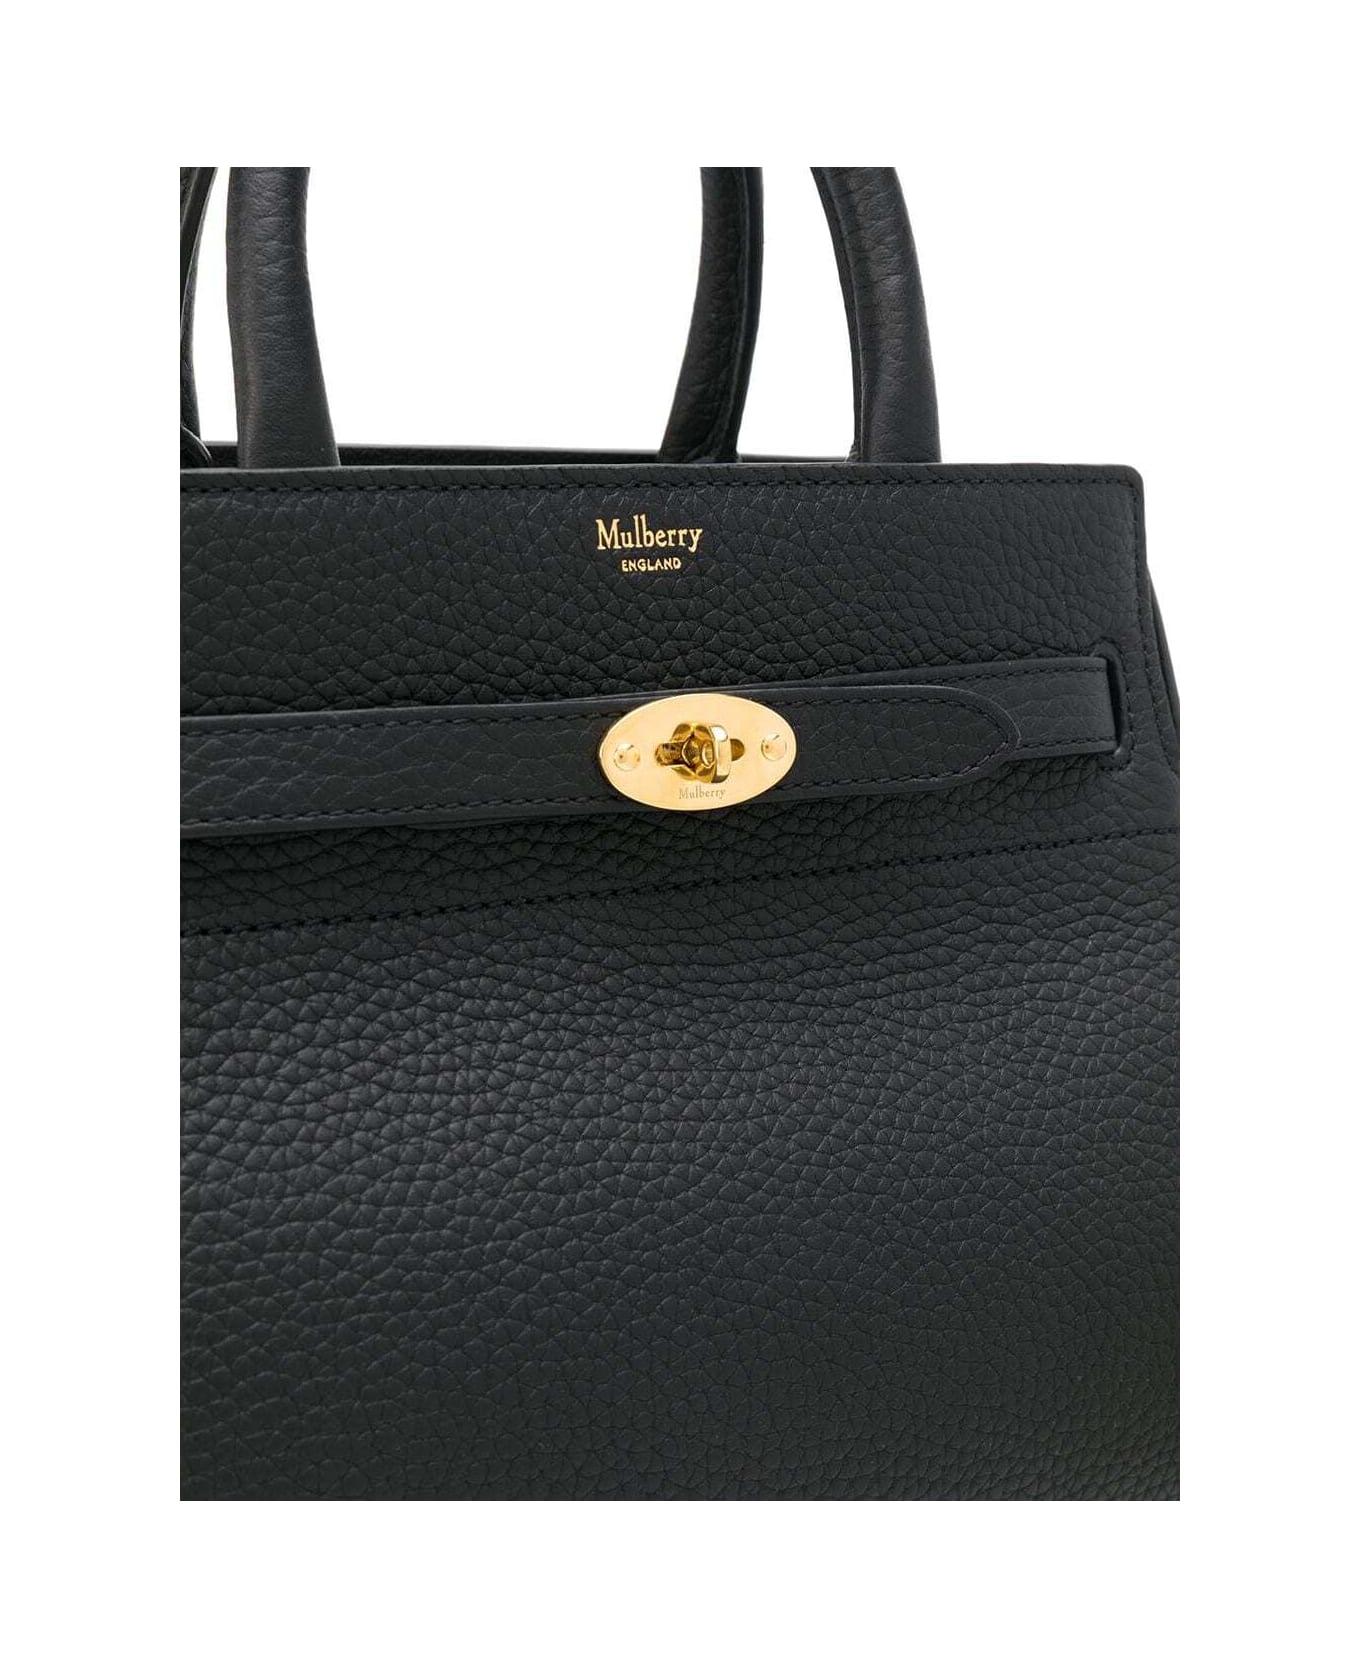 Mulberry Small Belted
Bayswater Heavy - Black